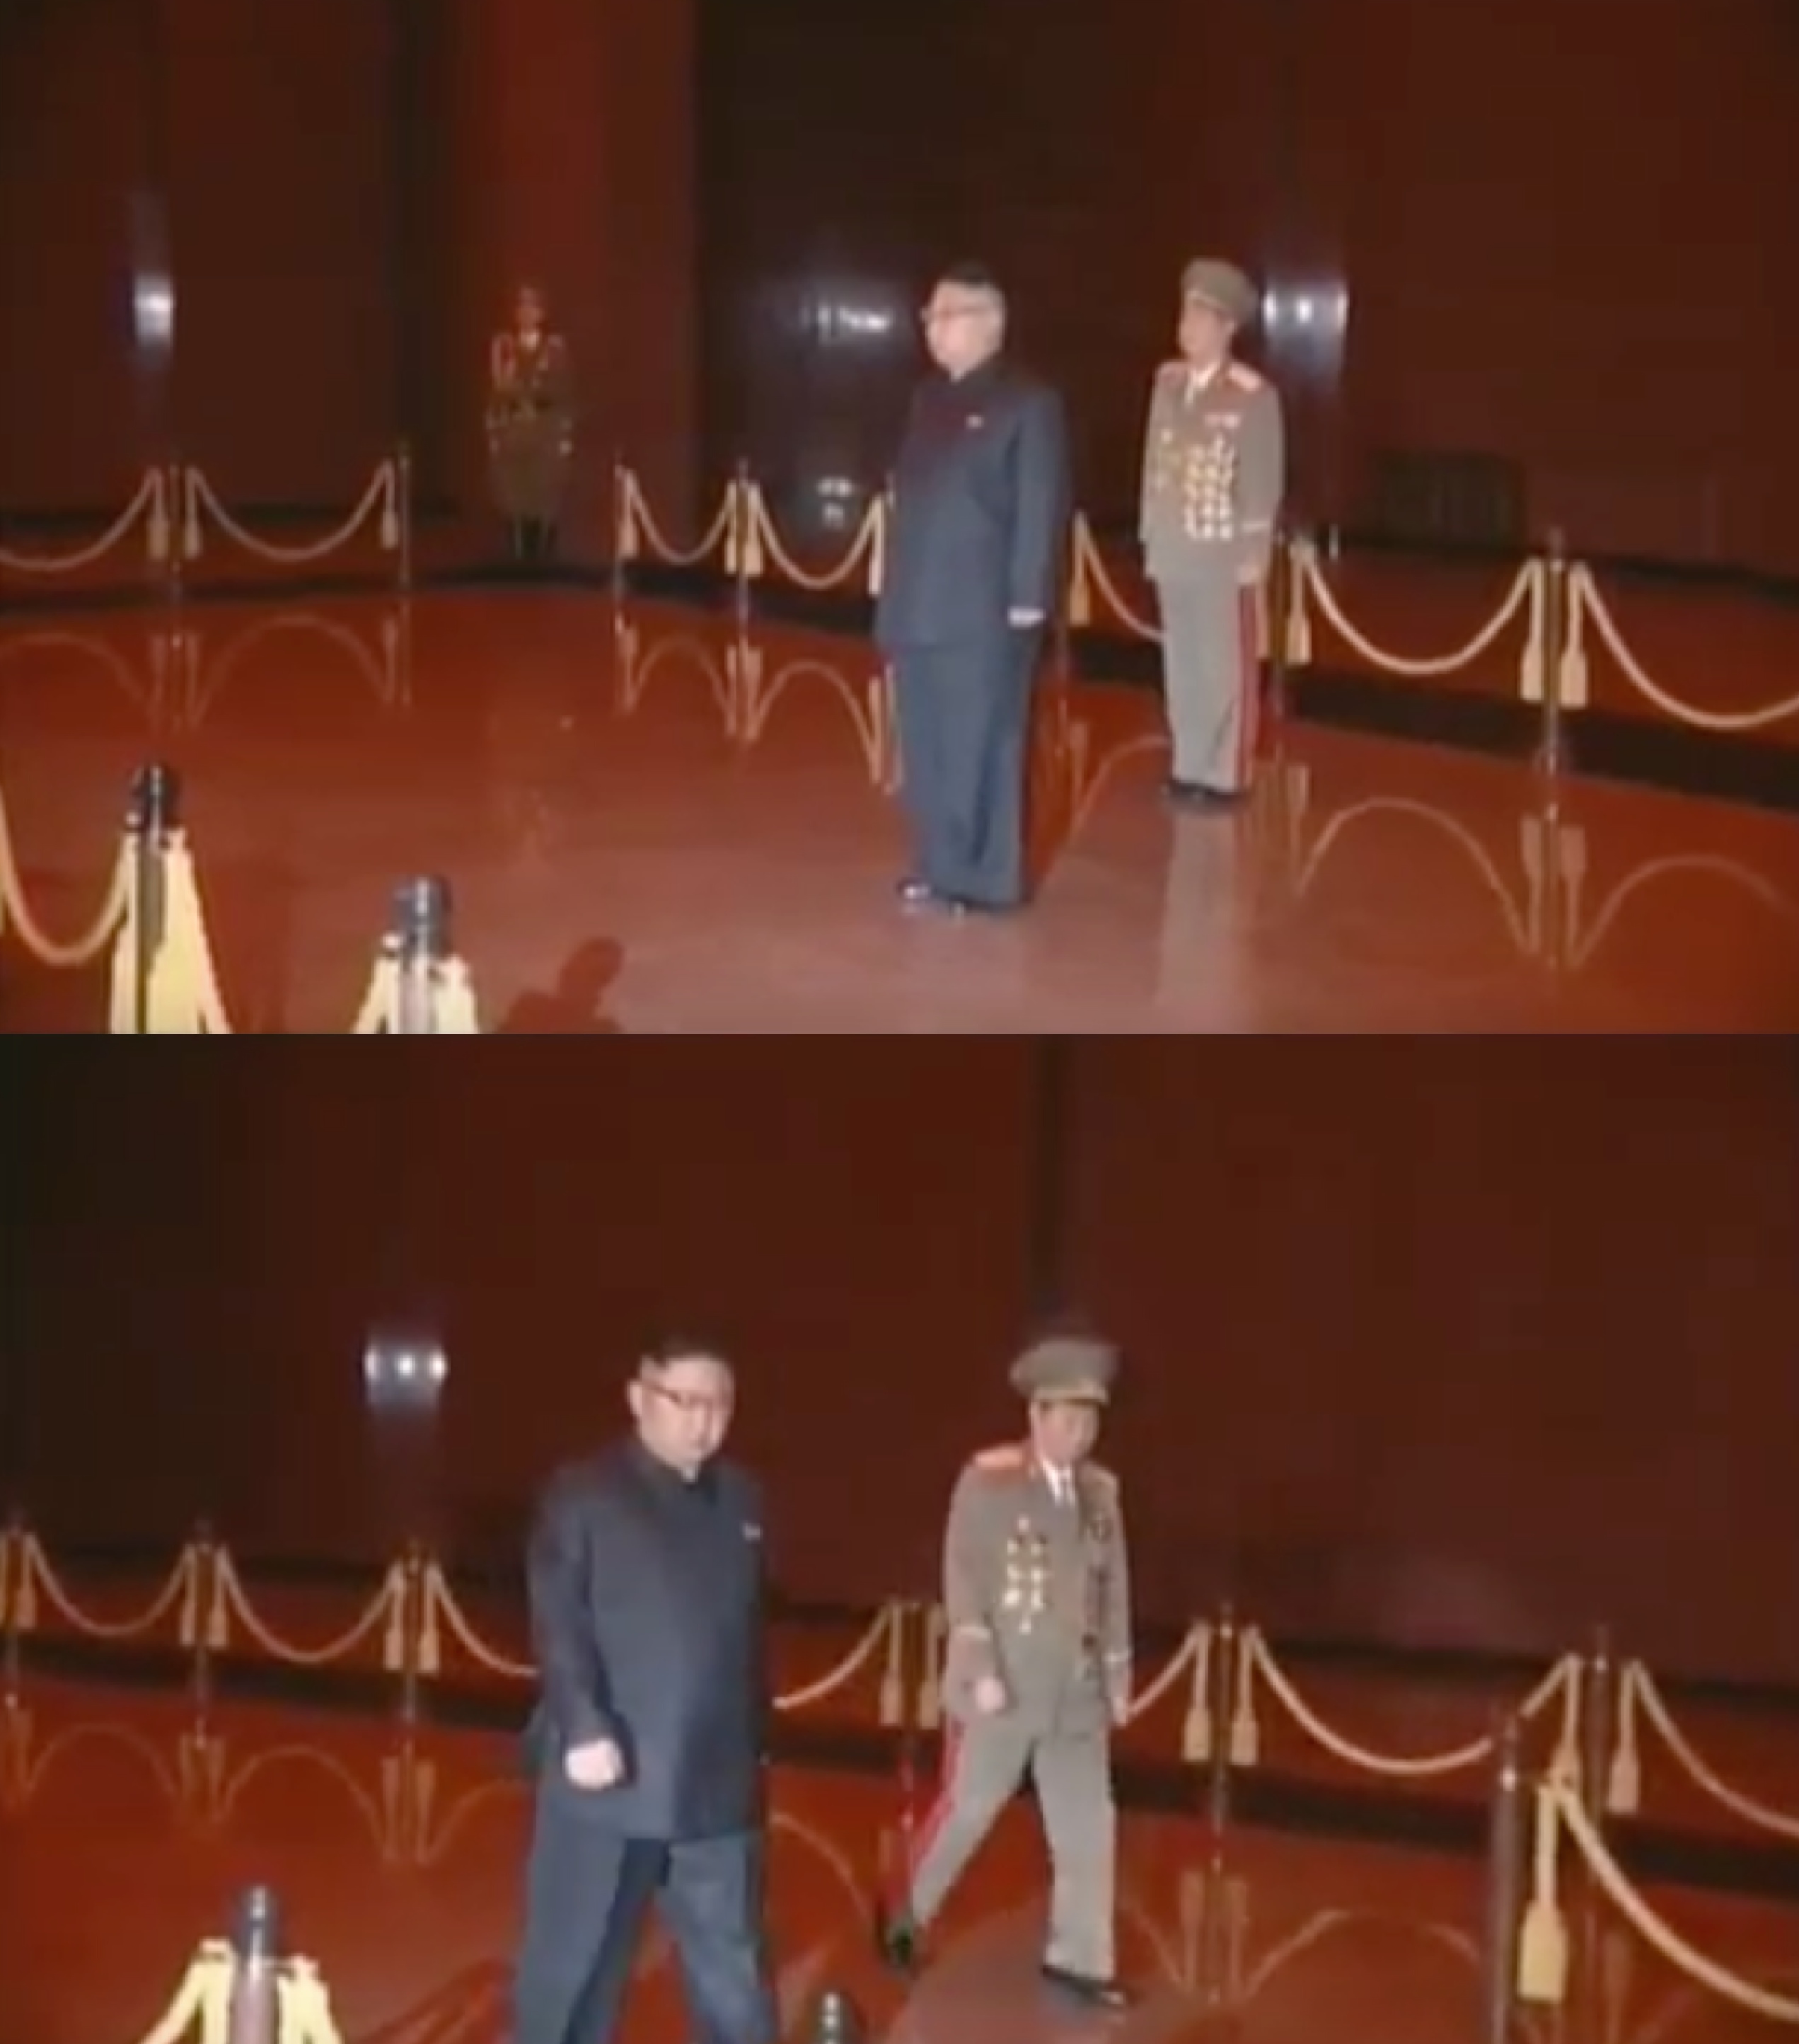 Kim Jong Un in the chamber containing the preserved remains of his father on February 16, 2017 (Photo: Korean Central Television).